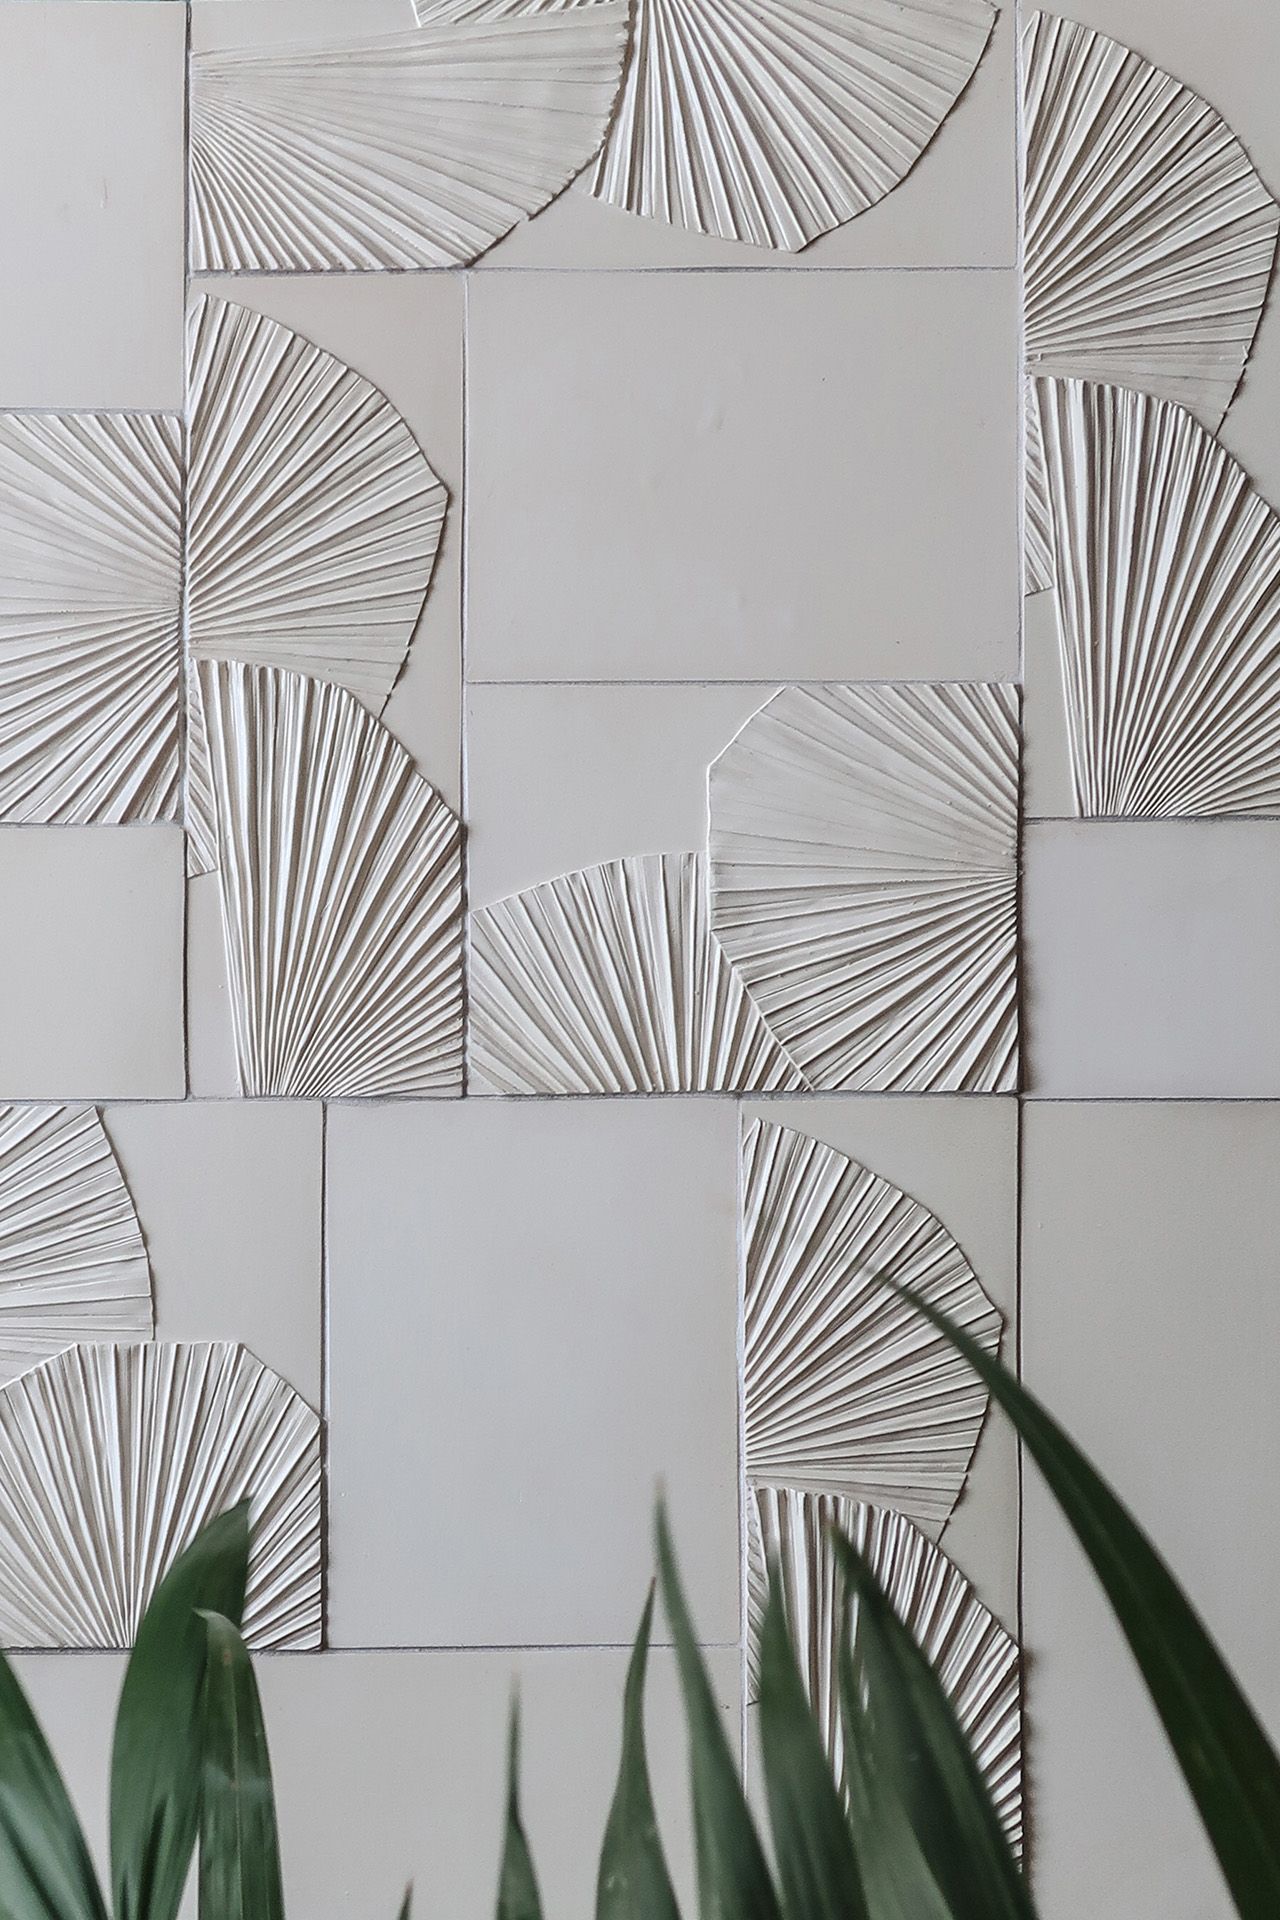 Wall Tiles Designs: Enhance Your Space with Stylish and Functional Wall Tiles